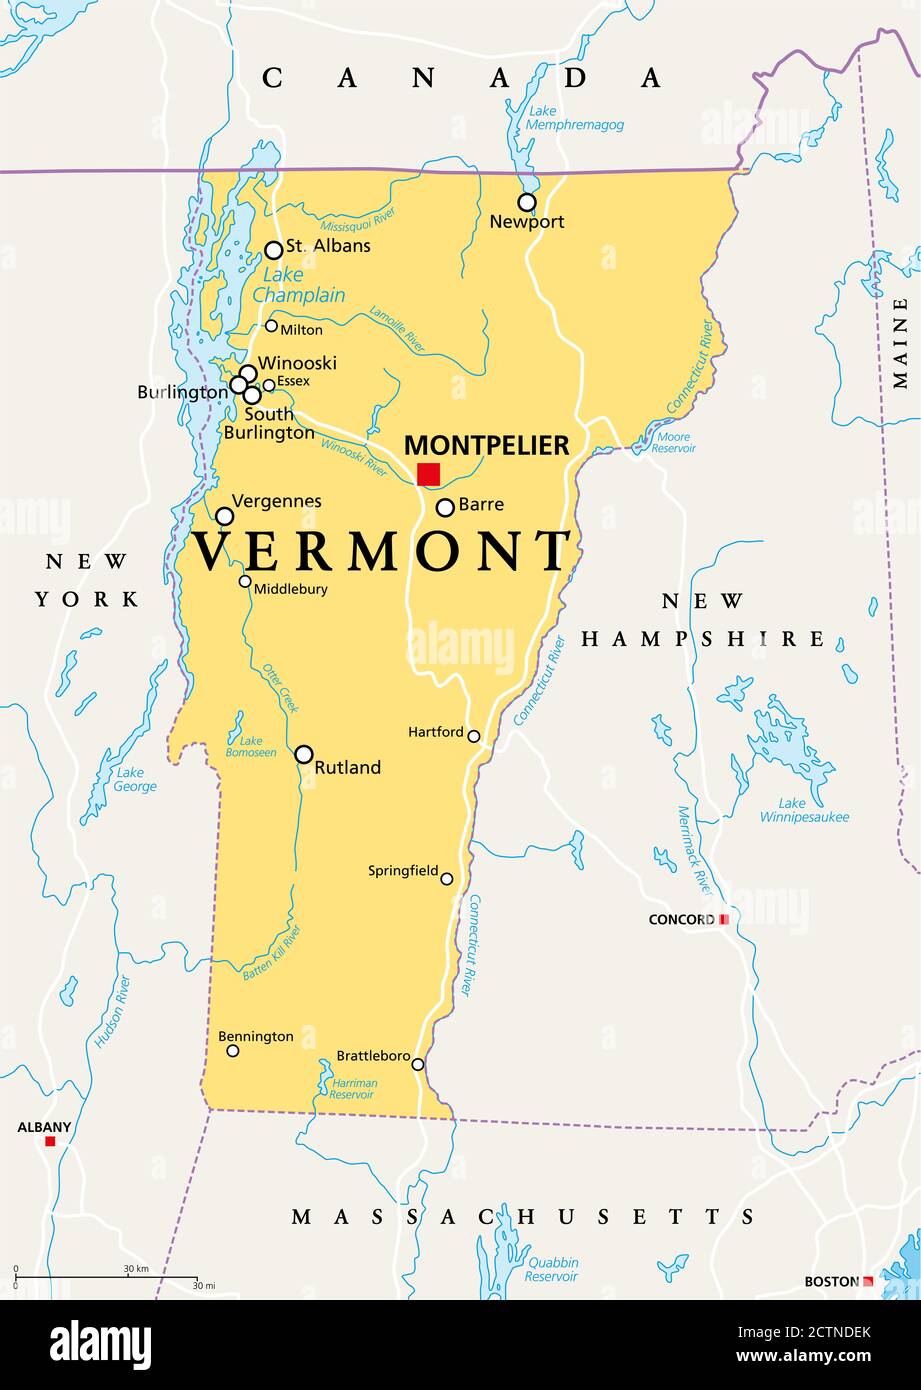 Vermont, VT, political map with capital Montpelier, borders, cities, rivers and lakes. Northeastern state in the New England region of the USA. Stock Photo